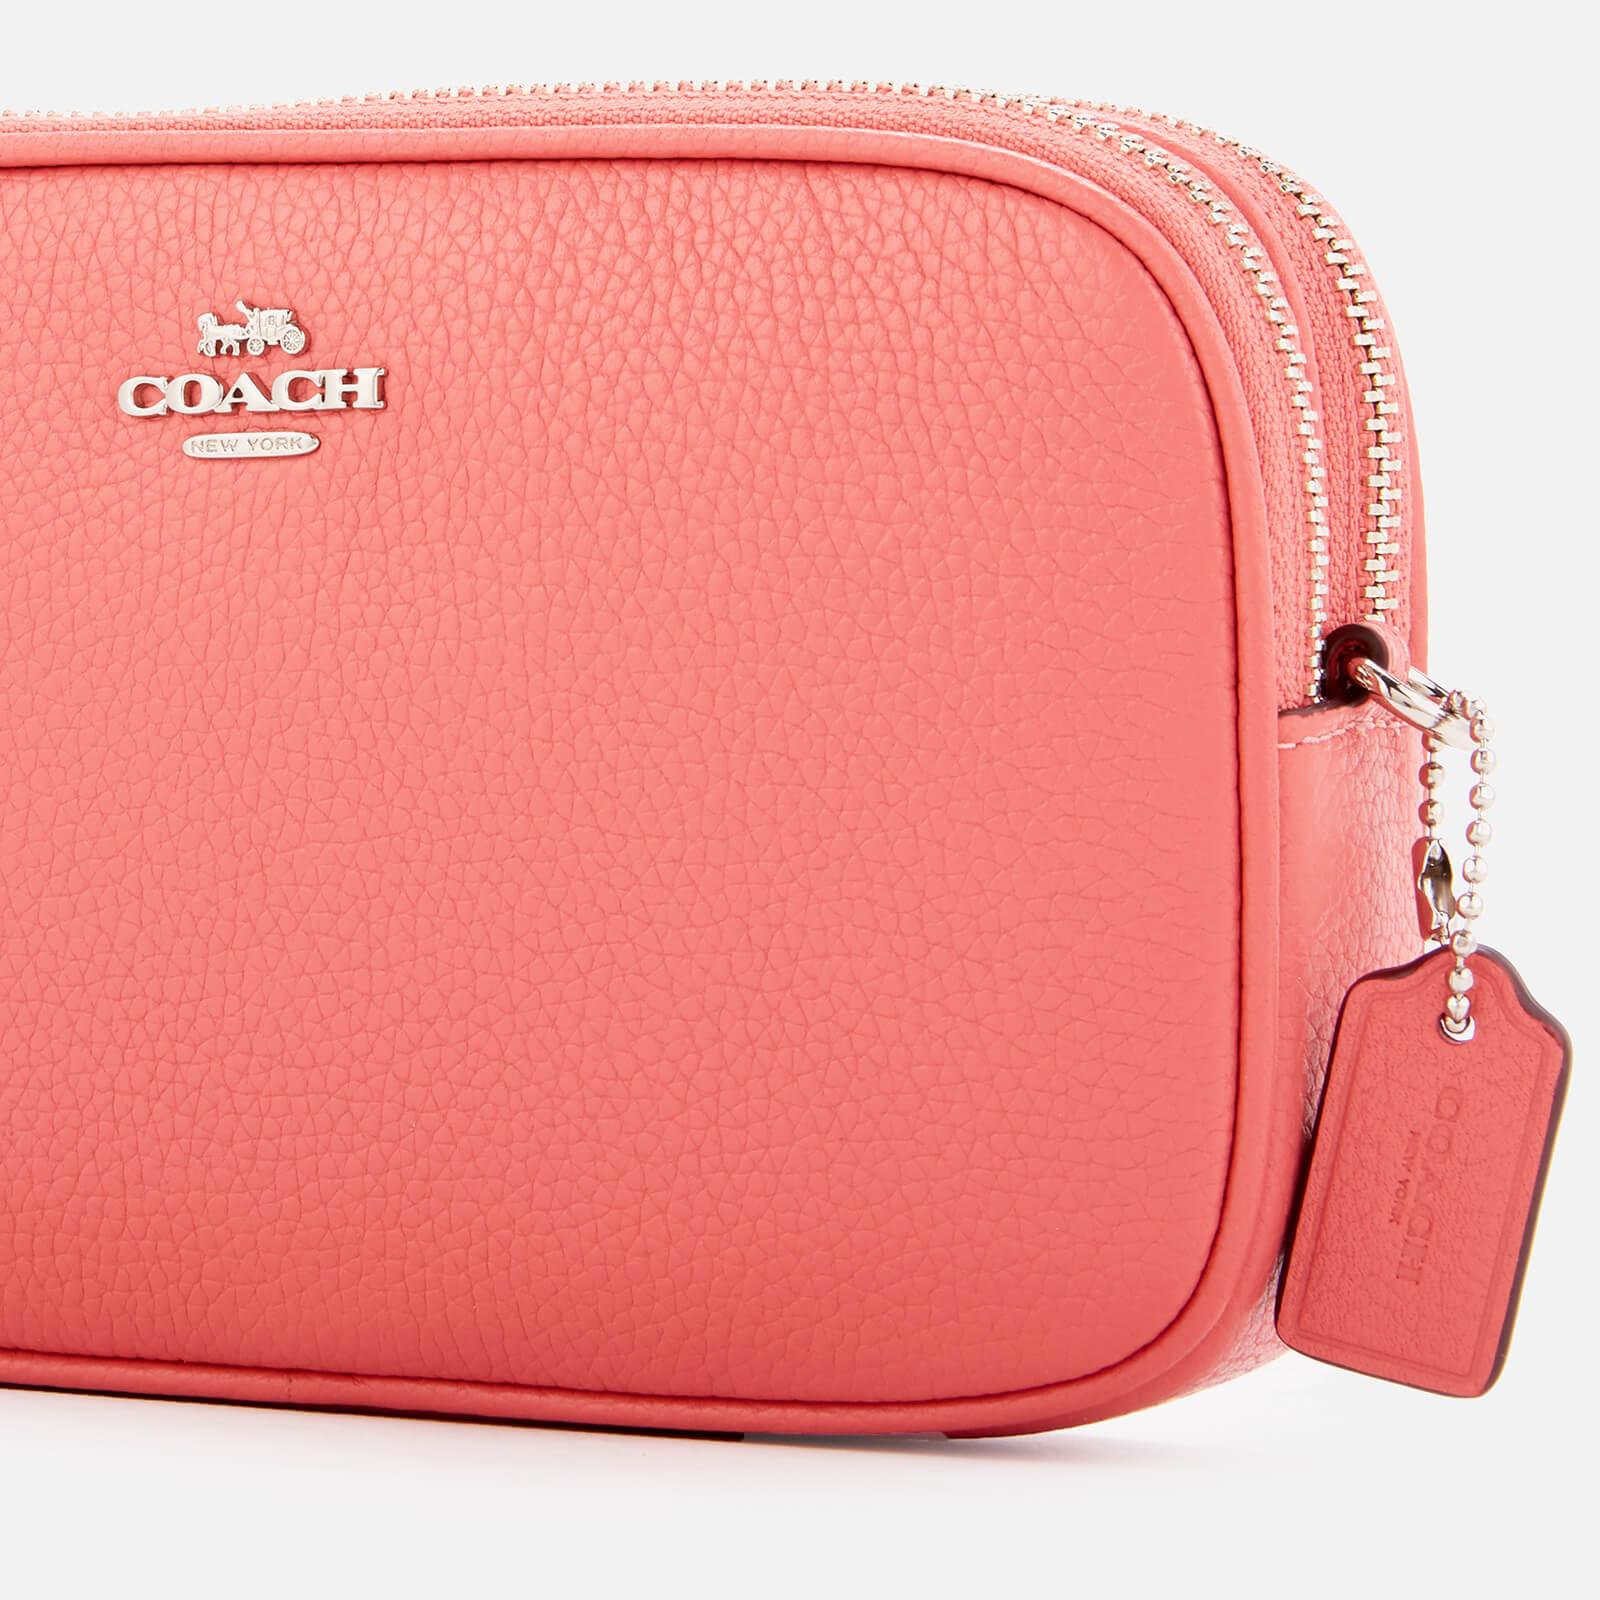 COACH Polished Pebble Cross Body Clutch Bag in Pink - Lyst